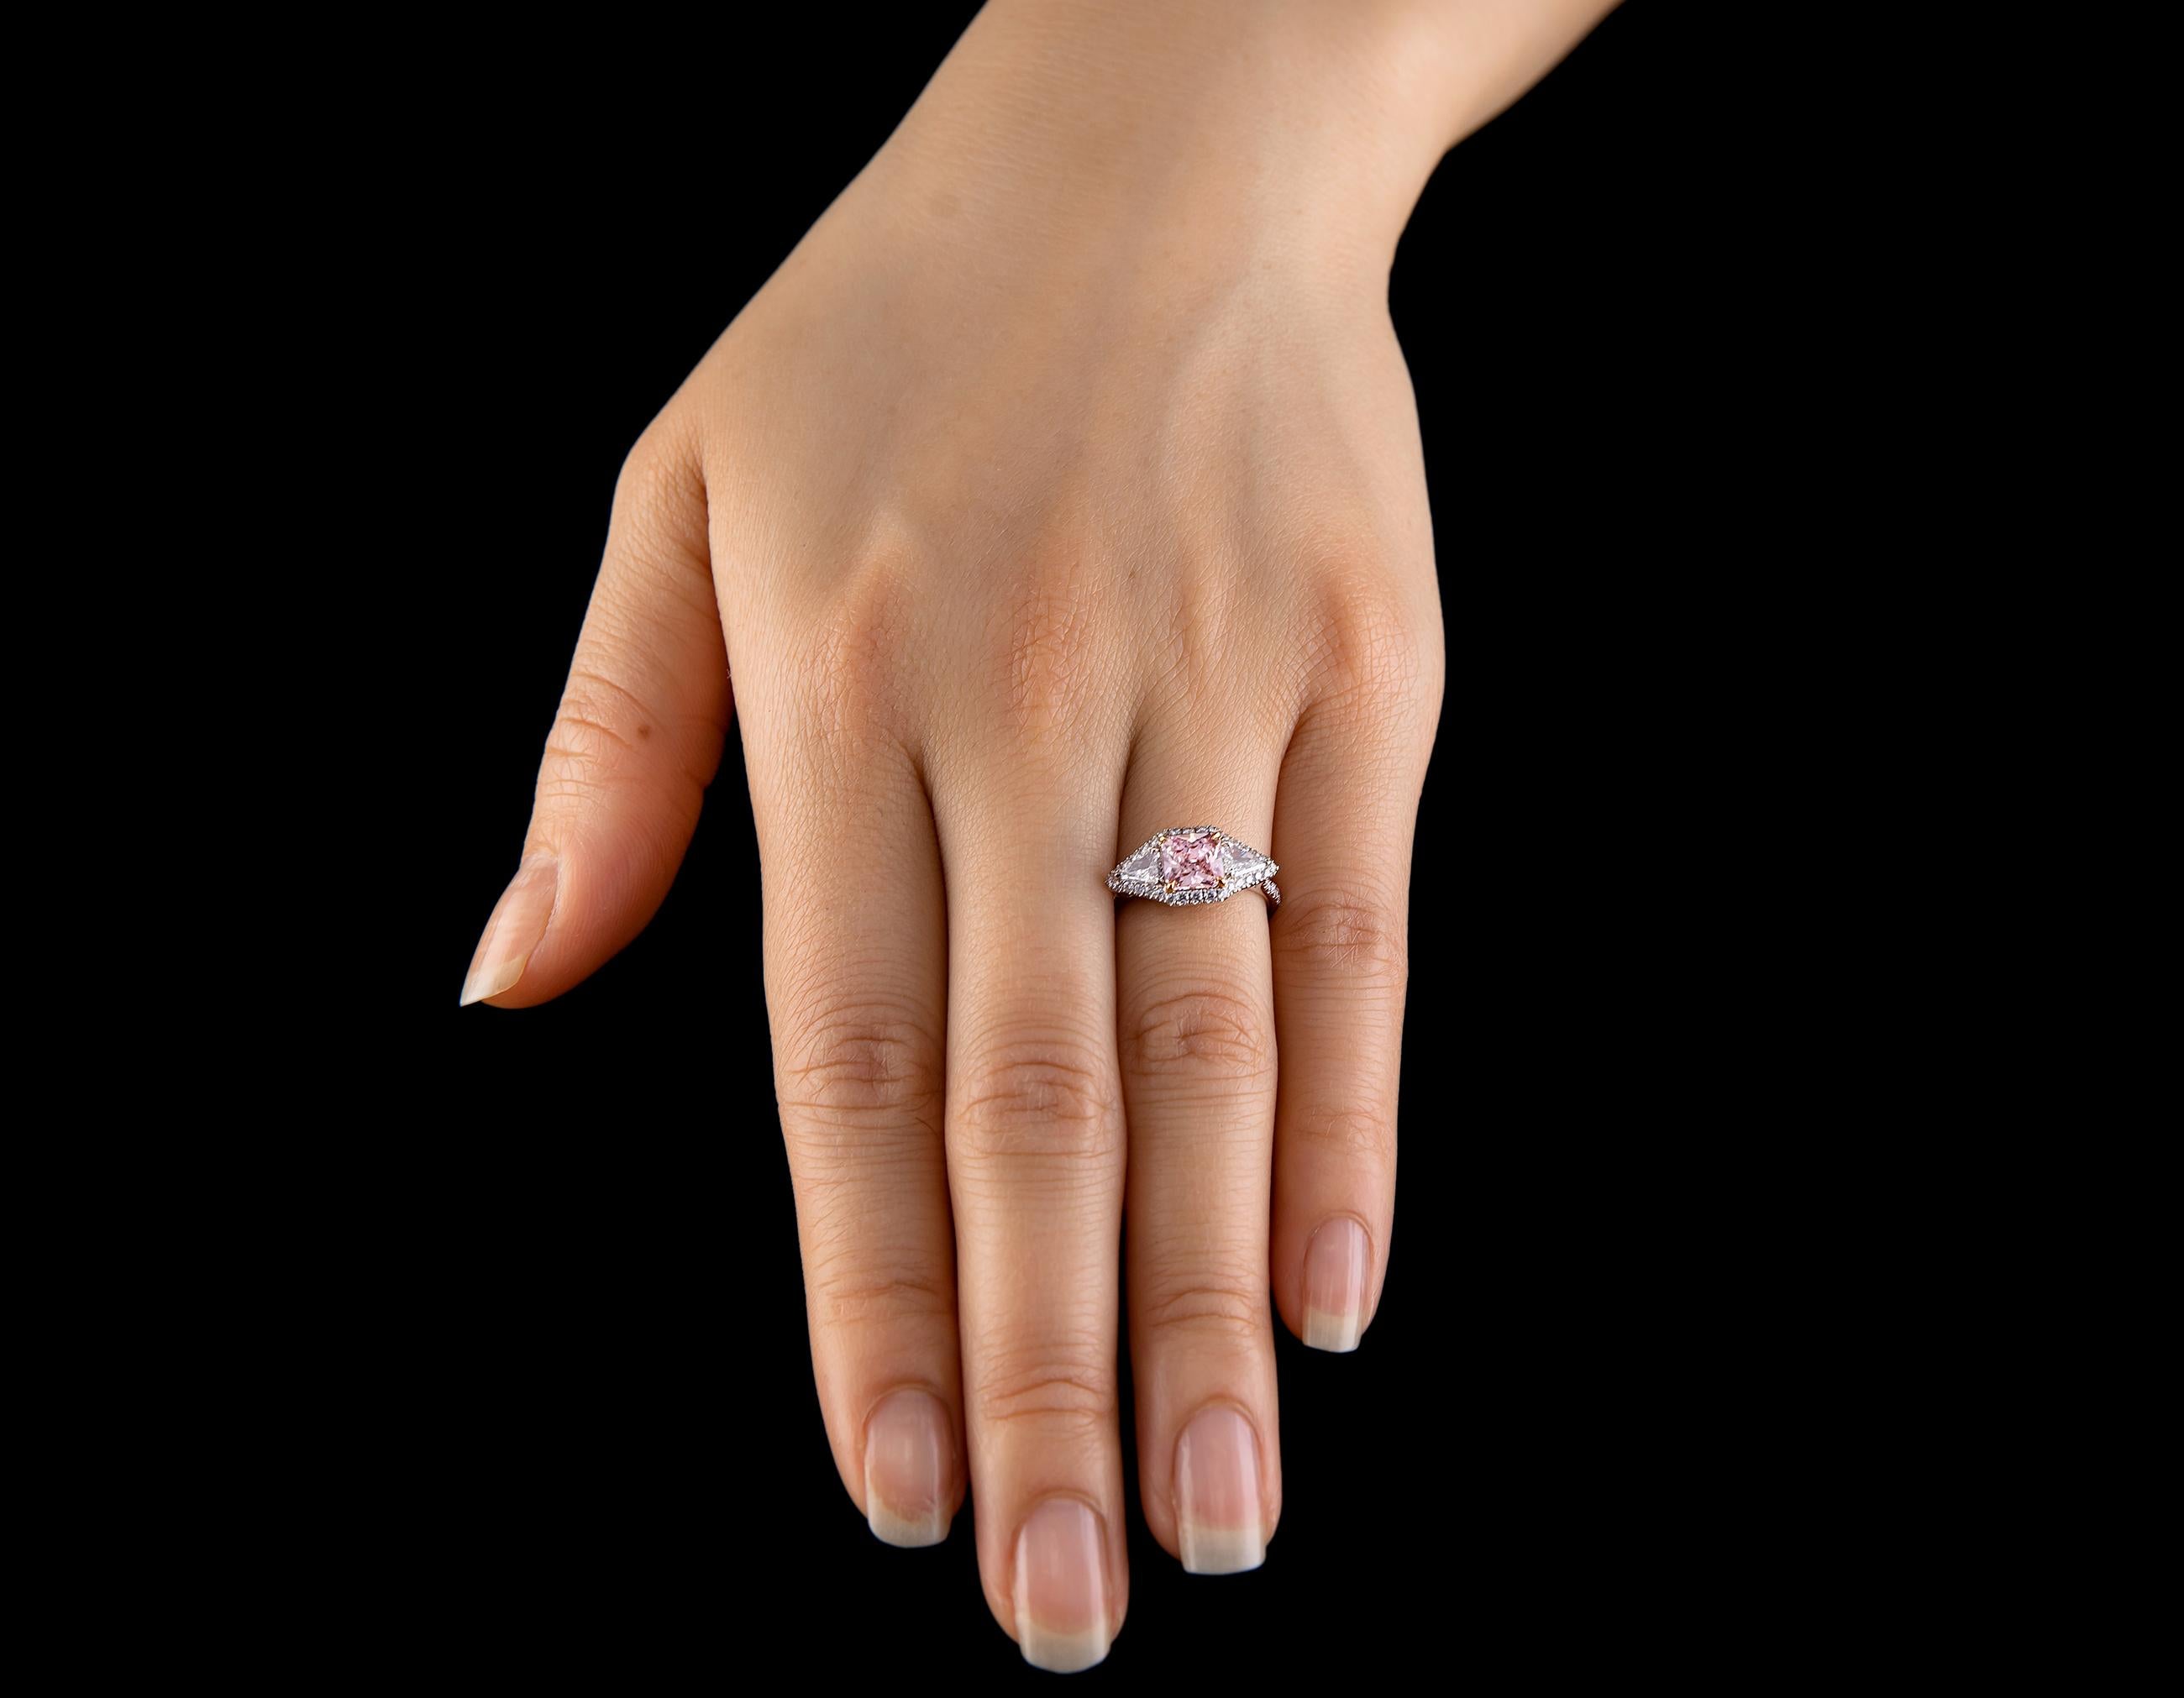 Women's Leon Mege Montpassier Style Platinum Diamond Ring with a Natural Pink Sapphire For Sale